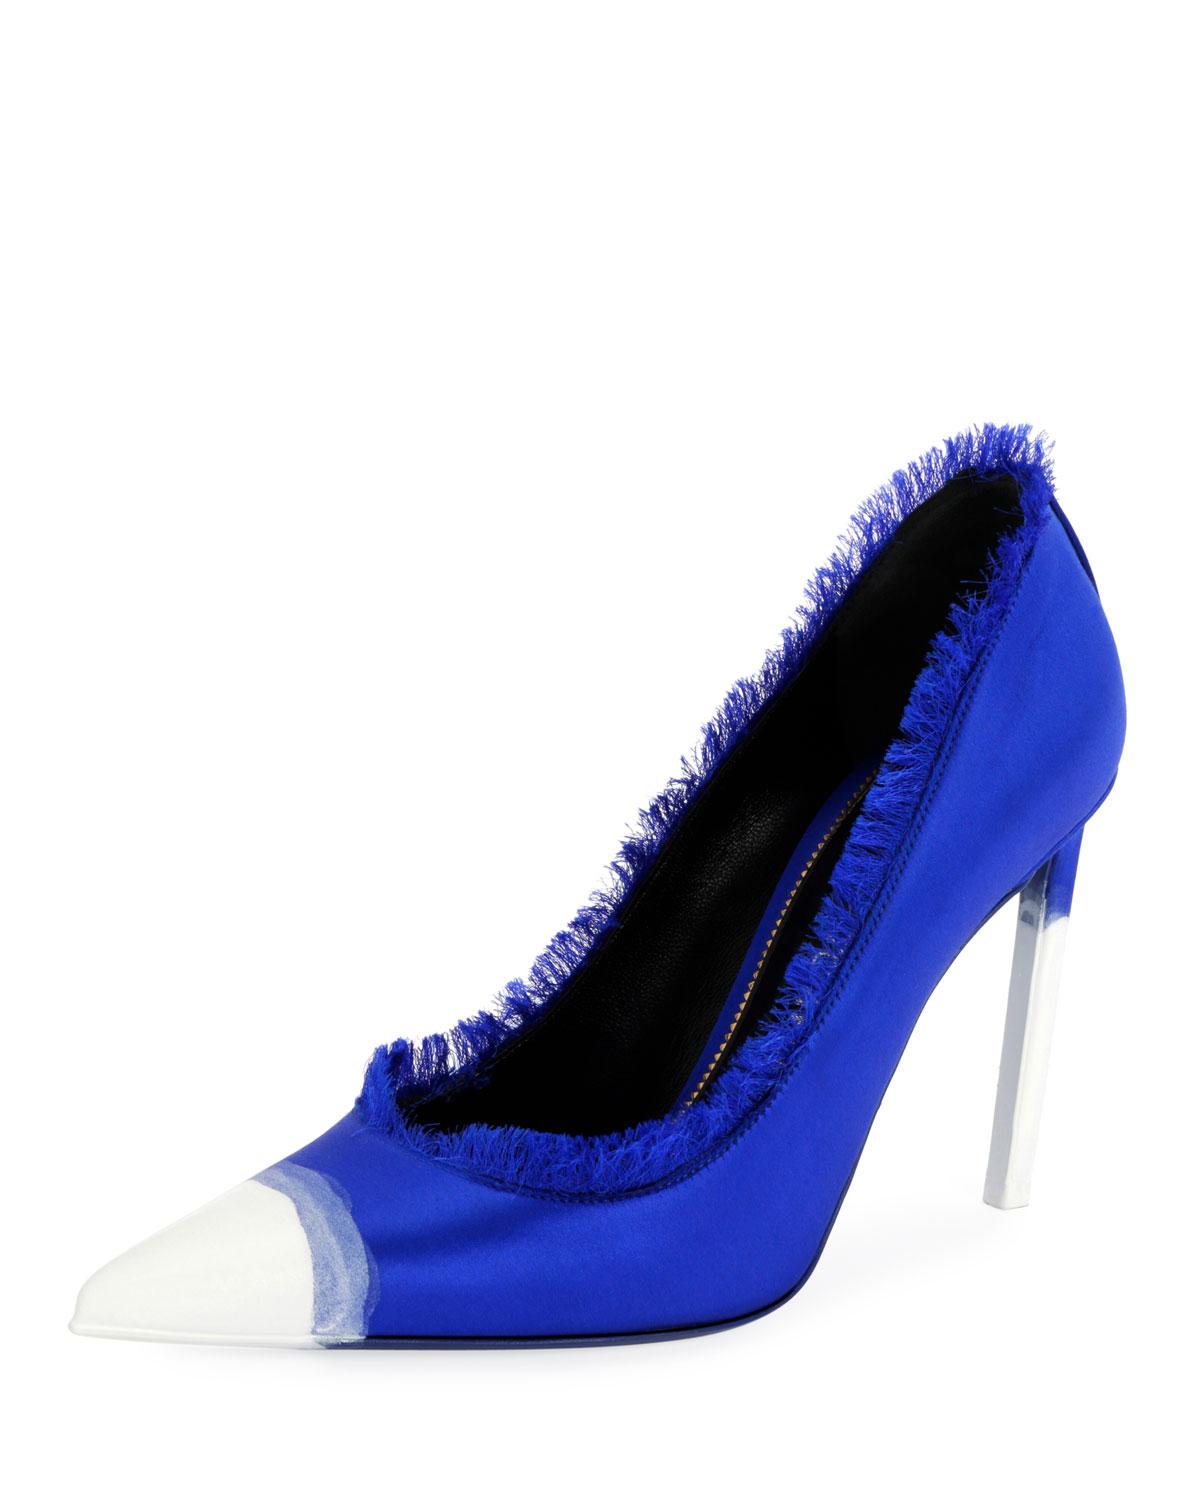 blue and white pumps